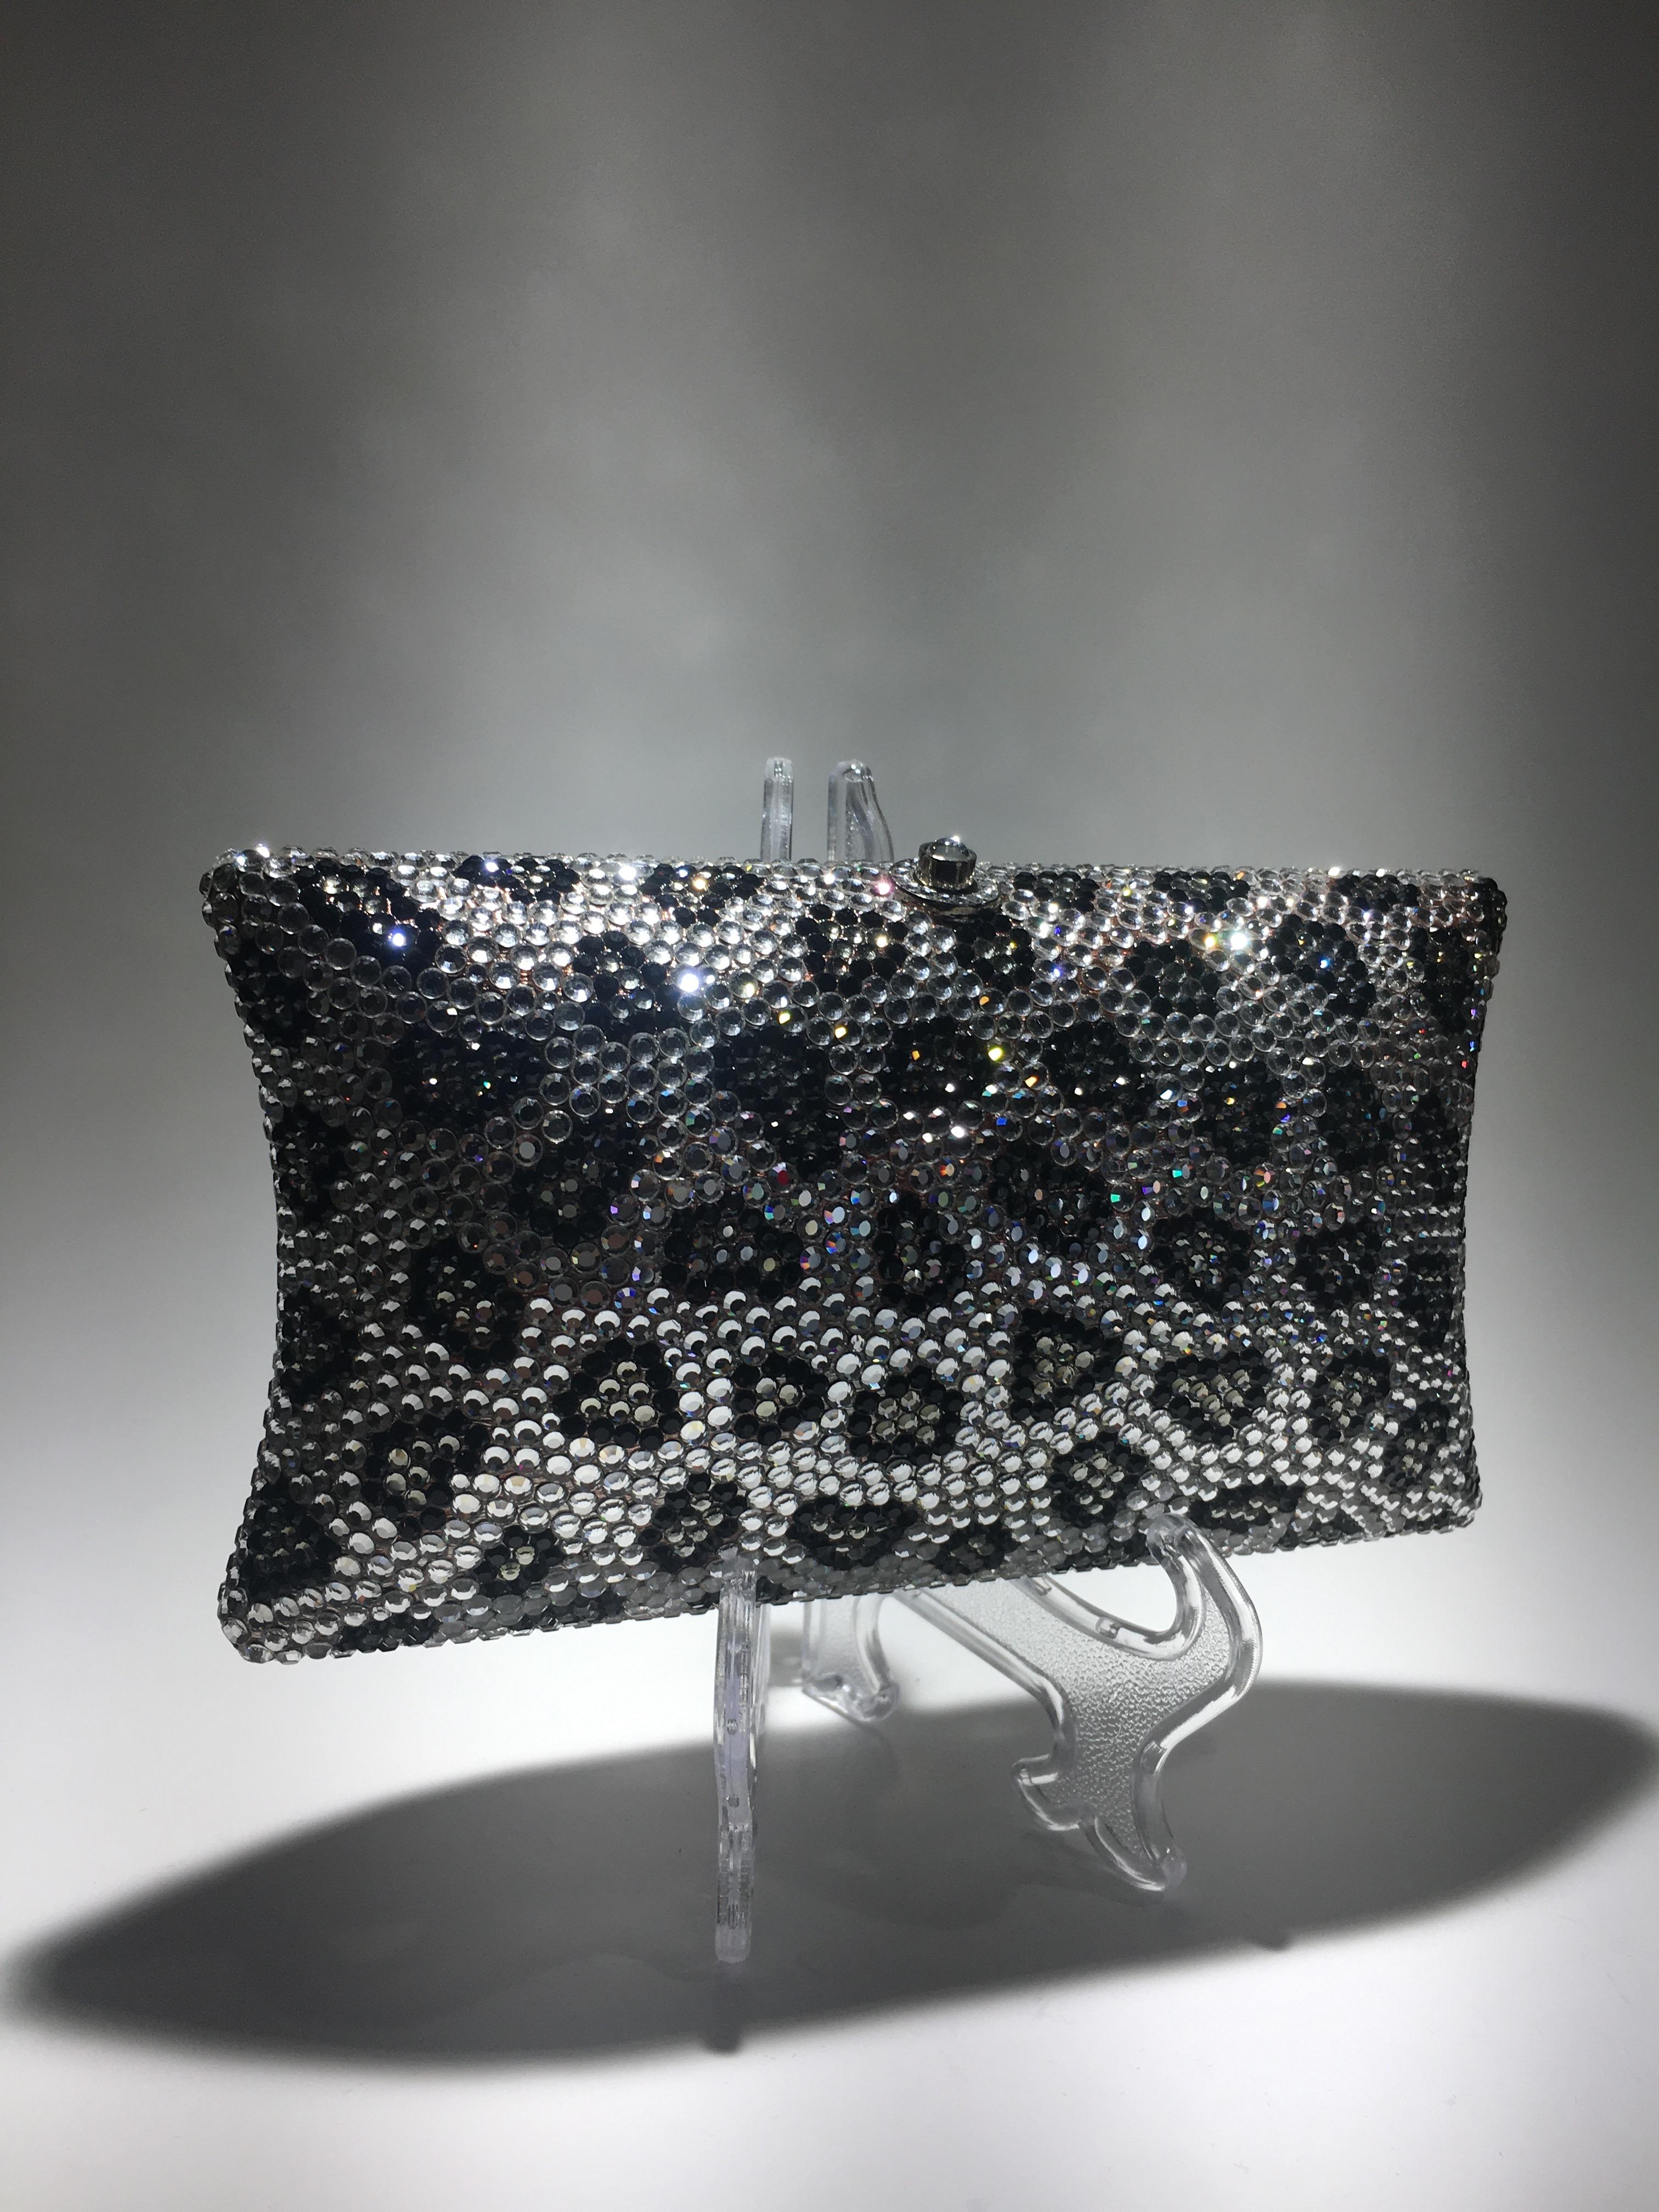 Judith Leiber Jeweled Clutch, Black And Clear Crrystals With Silver Strap. For Sale 3